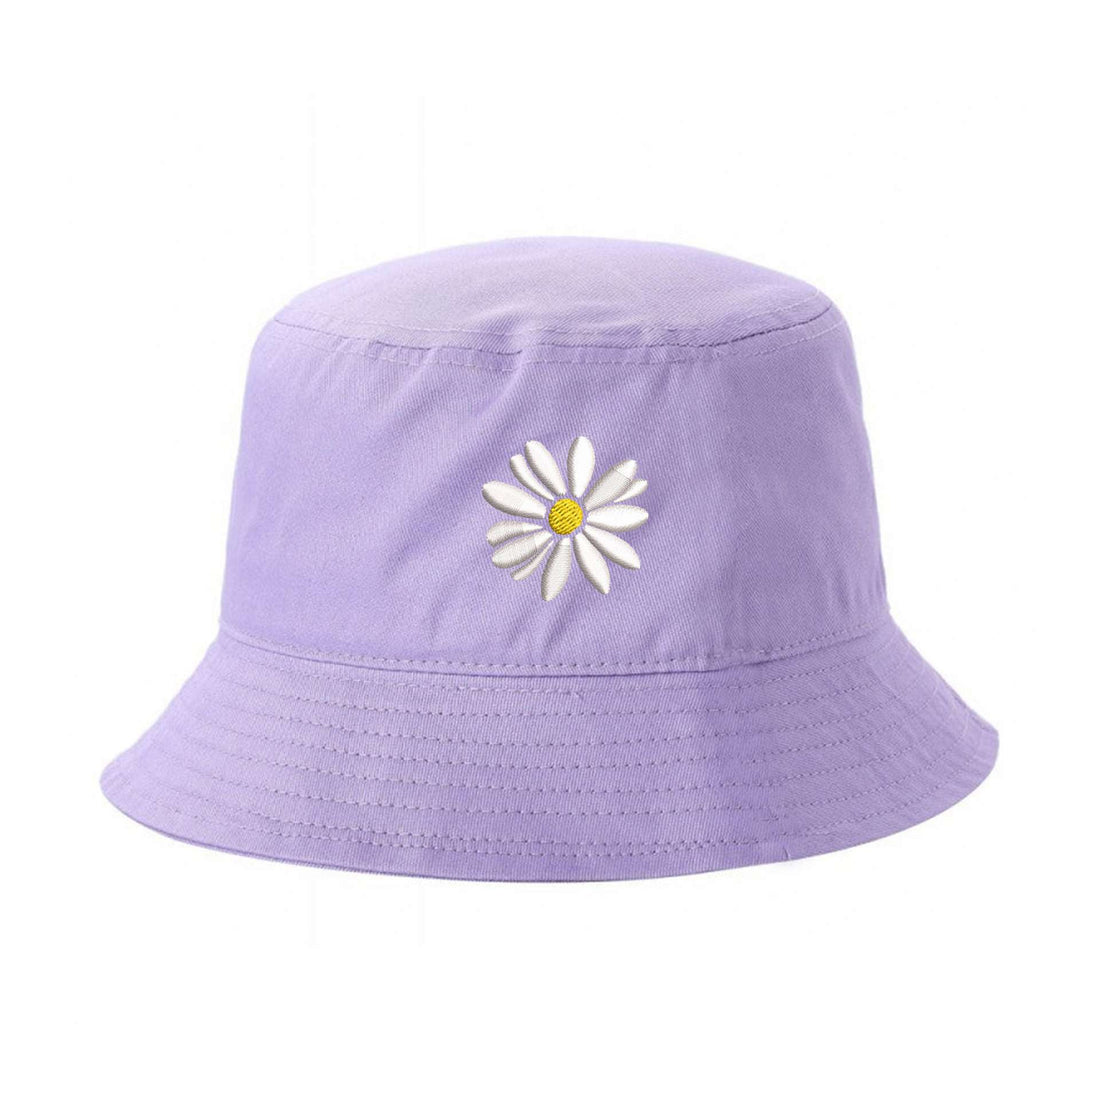 Lilac Bucket hat embroidered with a daisy flower - DSY Lifestyle